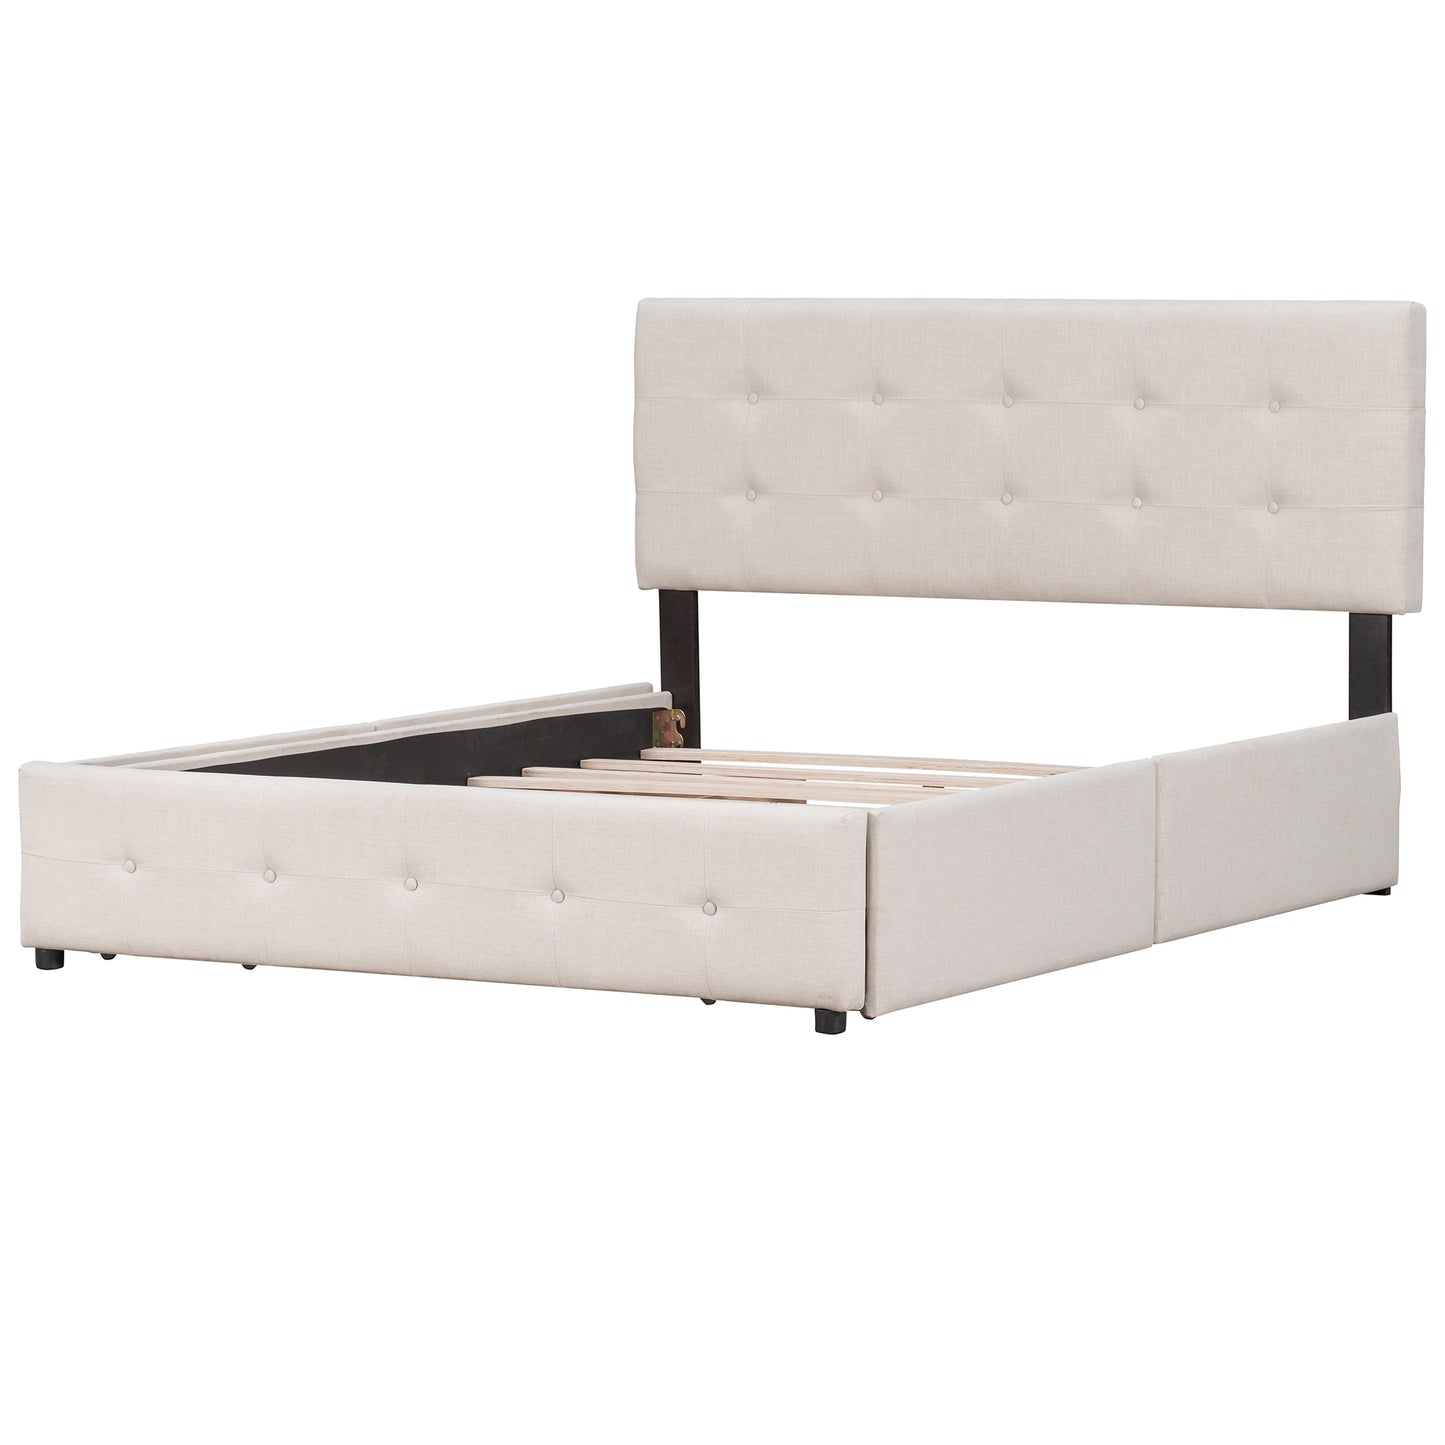 Queen-Size Beige Upholstered Platform Bed with 4 Side Drawers and Button-Tufted Headboard